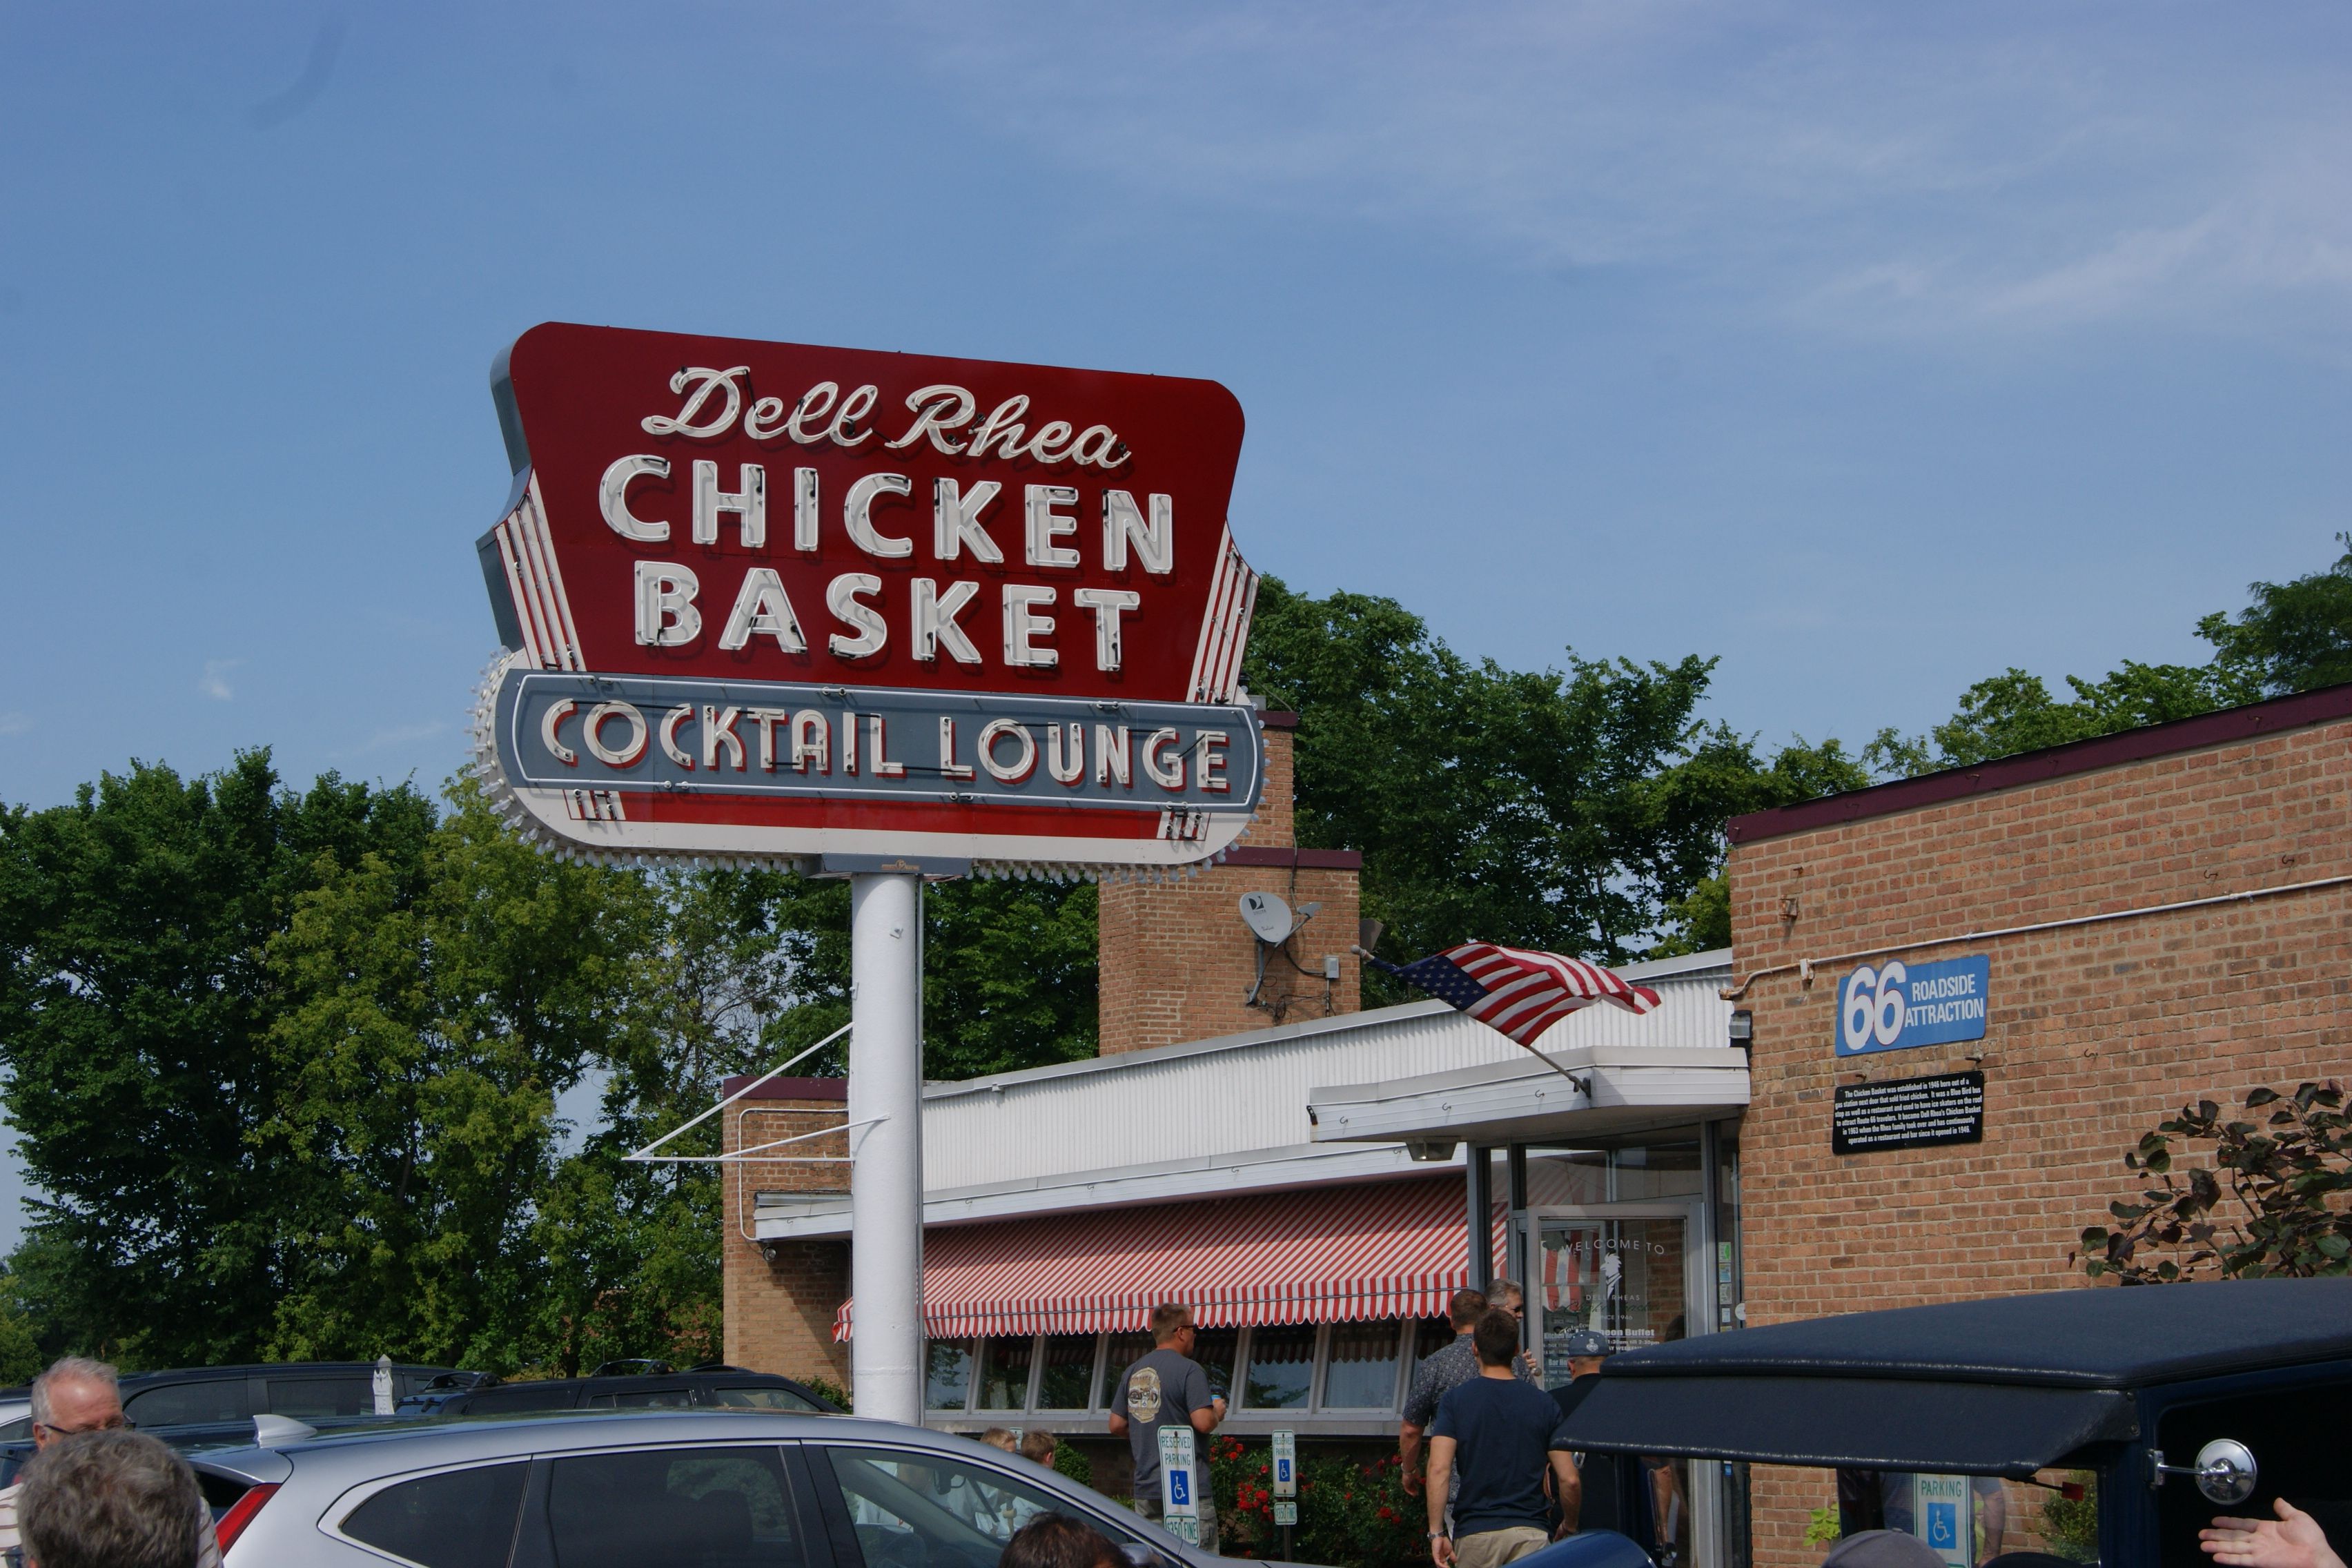 Iconic Eats At Dell Reha's Chicken Basket – The First Hundred Miles